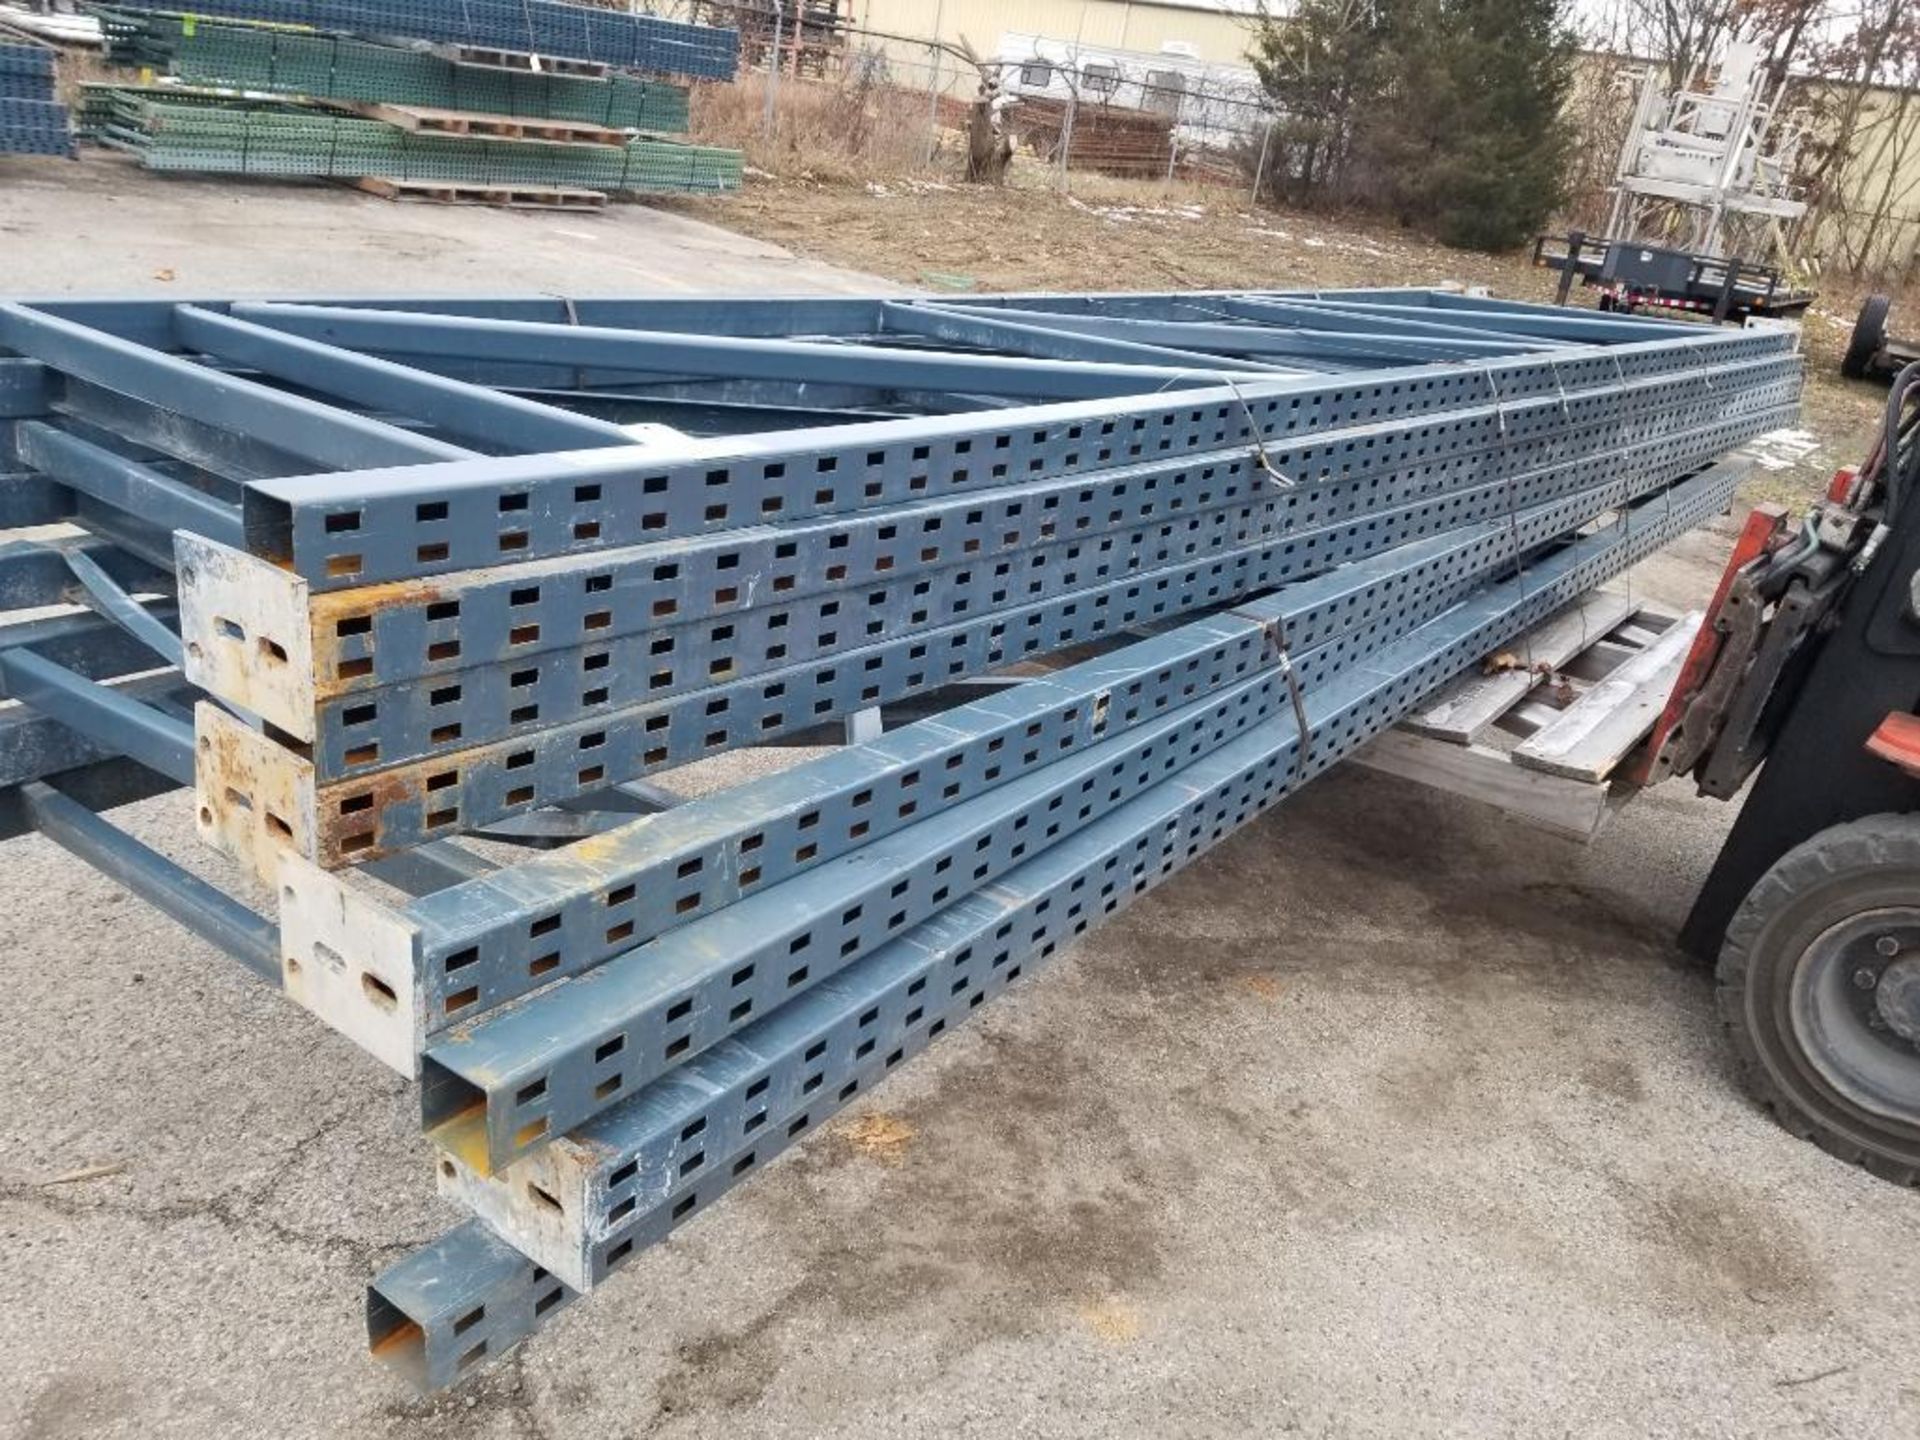 Qty 8 - Pallet racking uprights. 210in tall x 49in wide. - Image 7 of 7